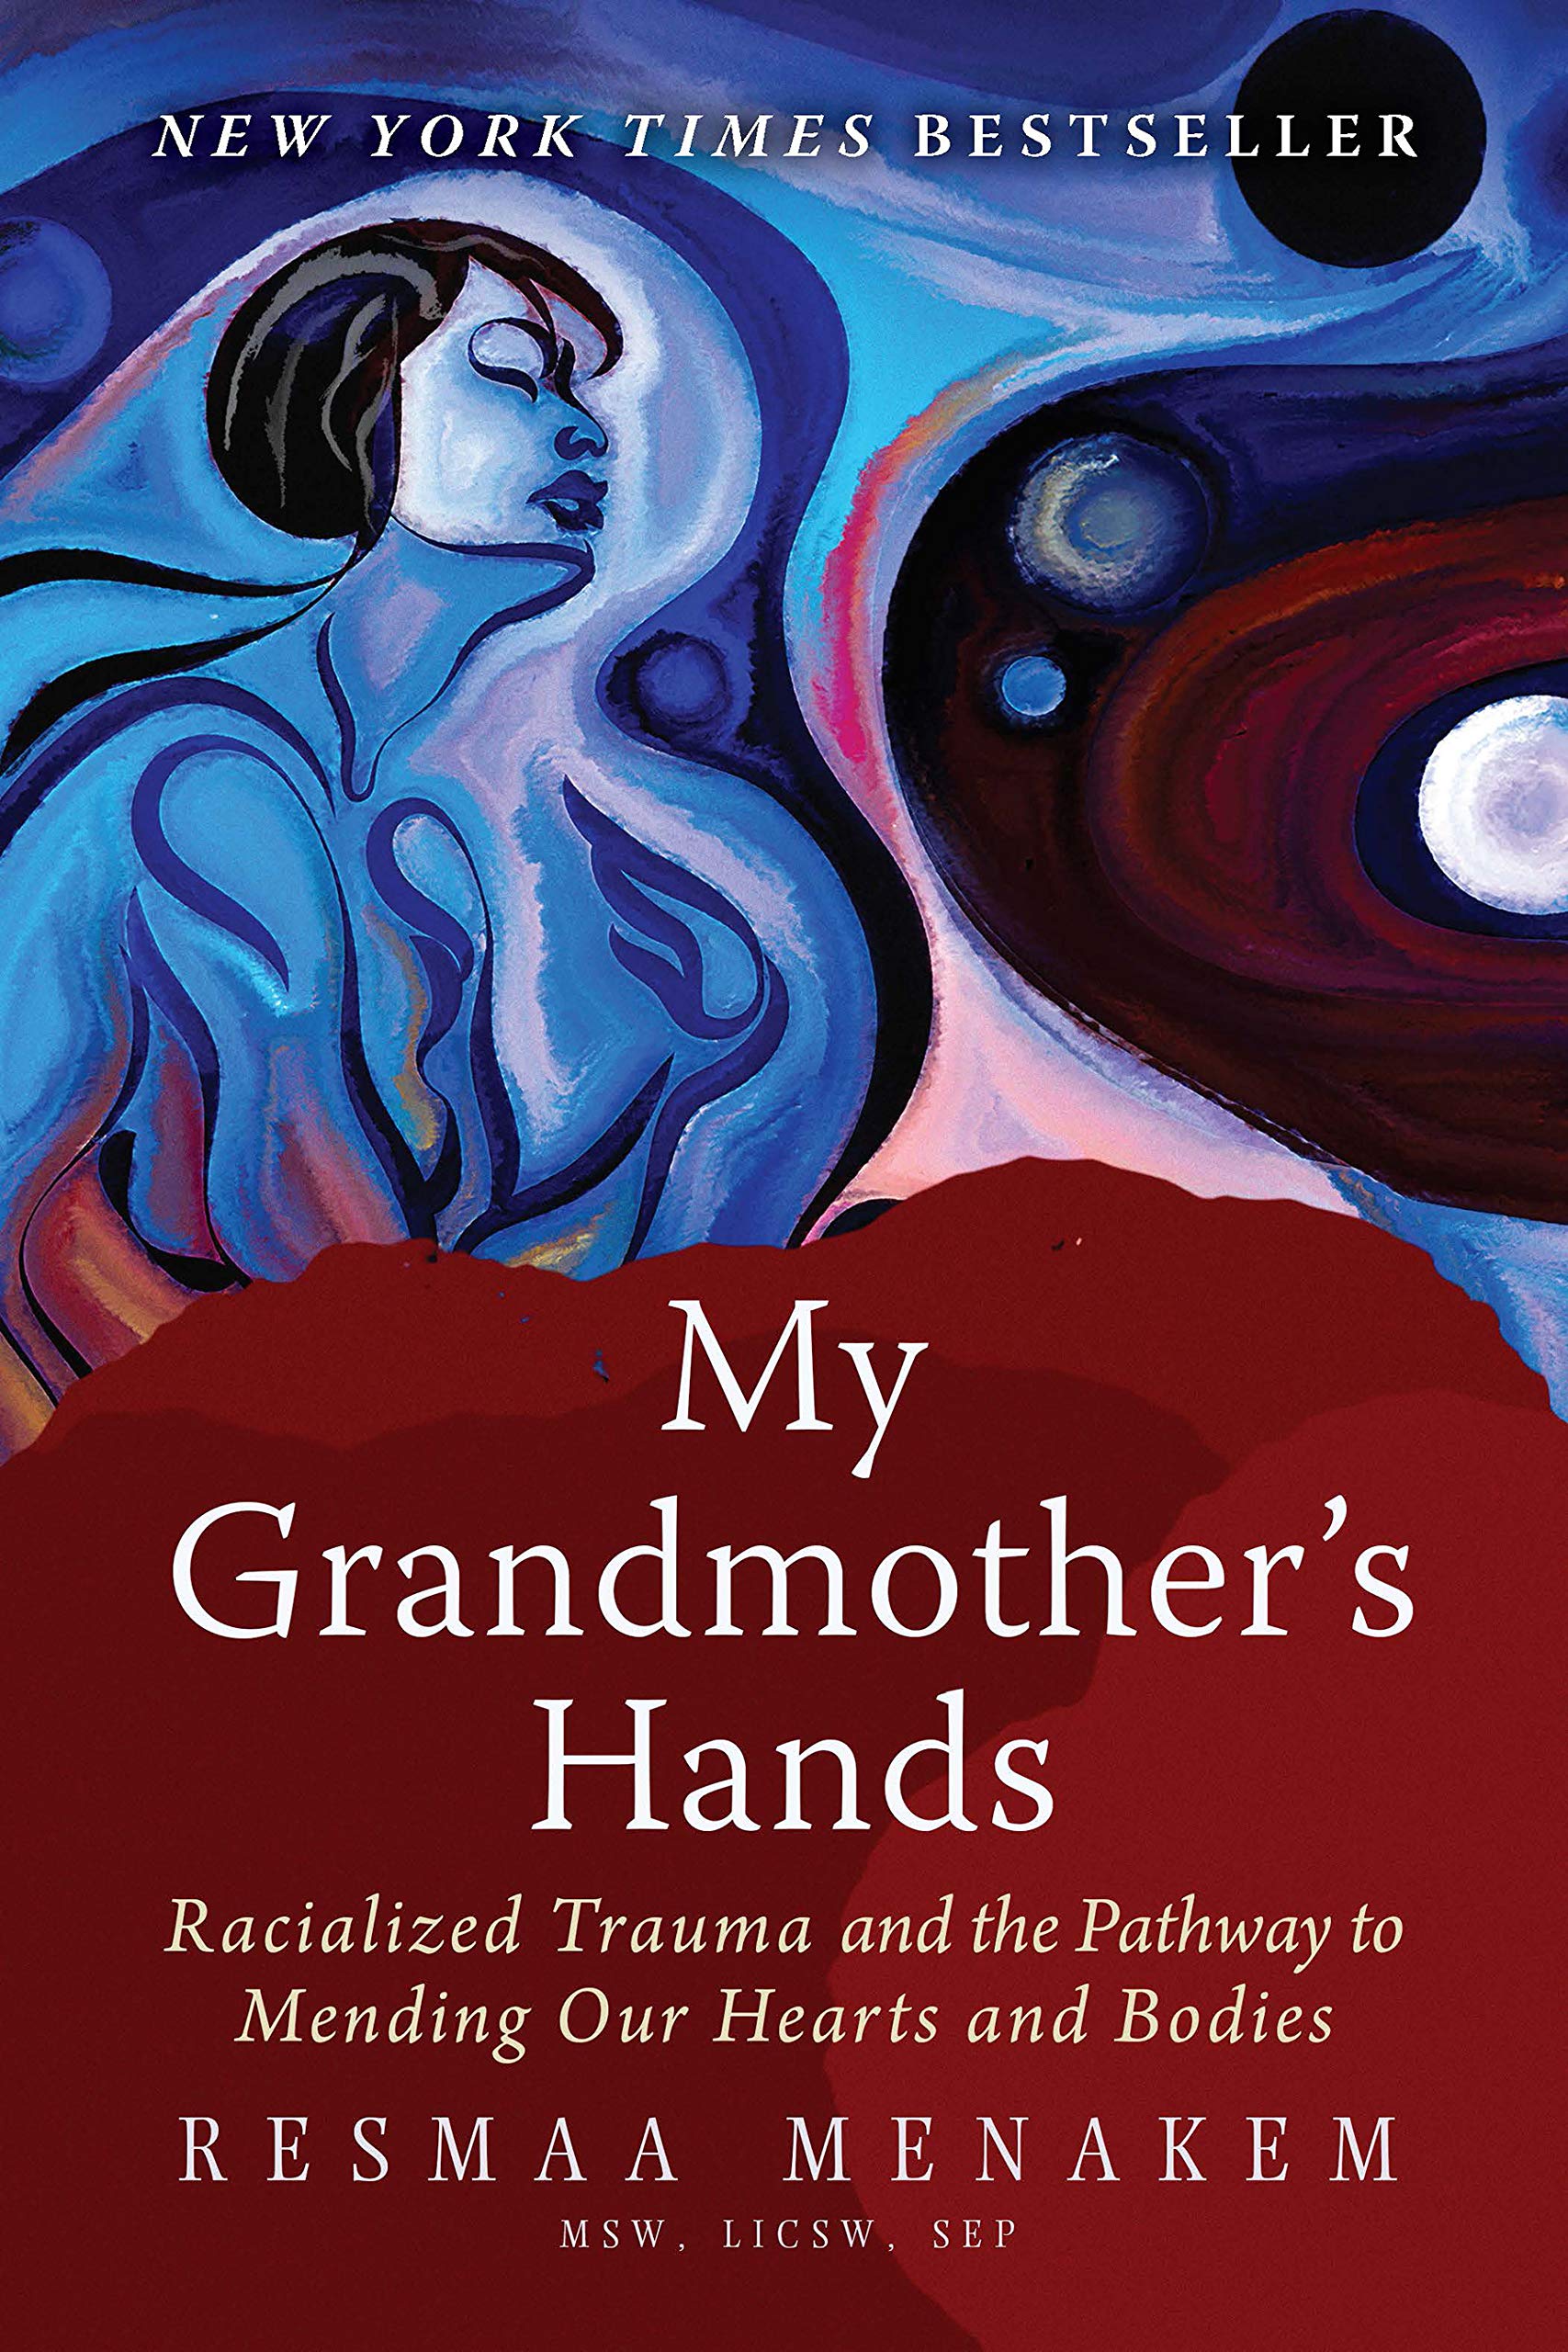 Book Cover: May Grandmother's Hands by Resmaa Menakem